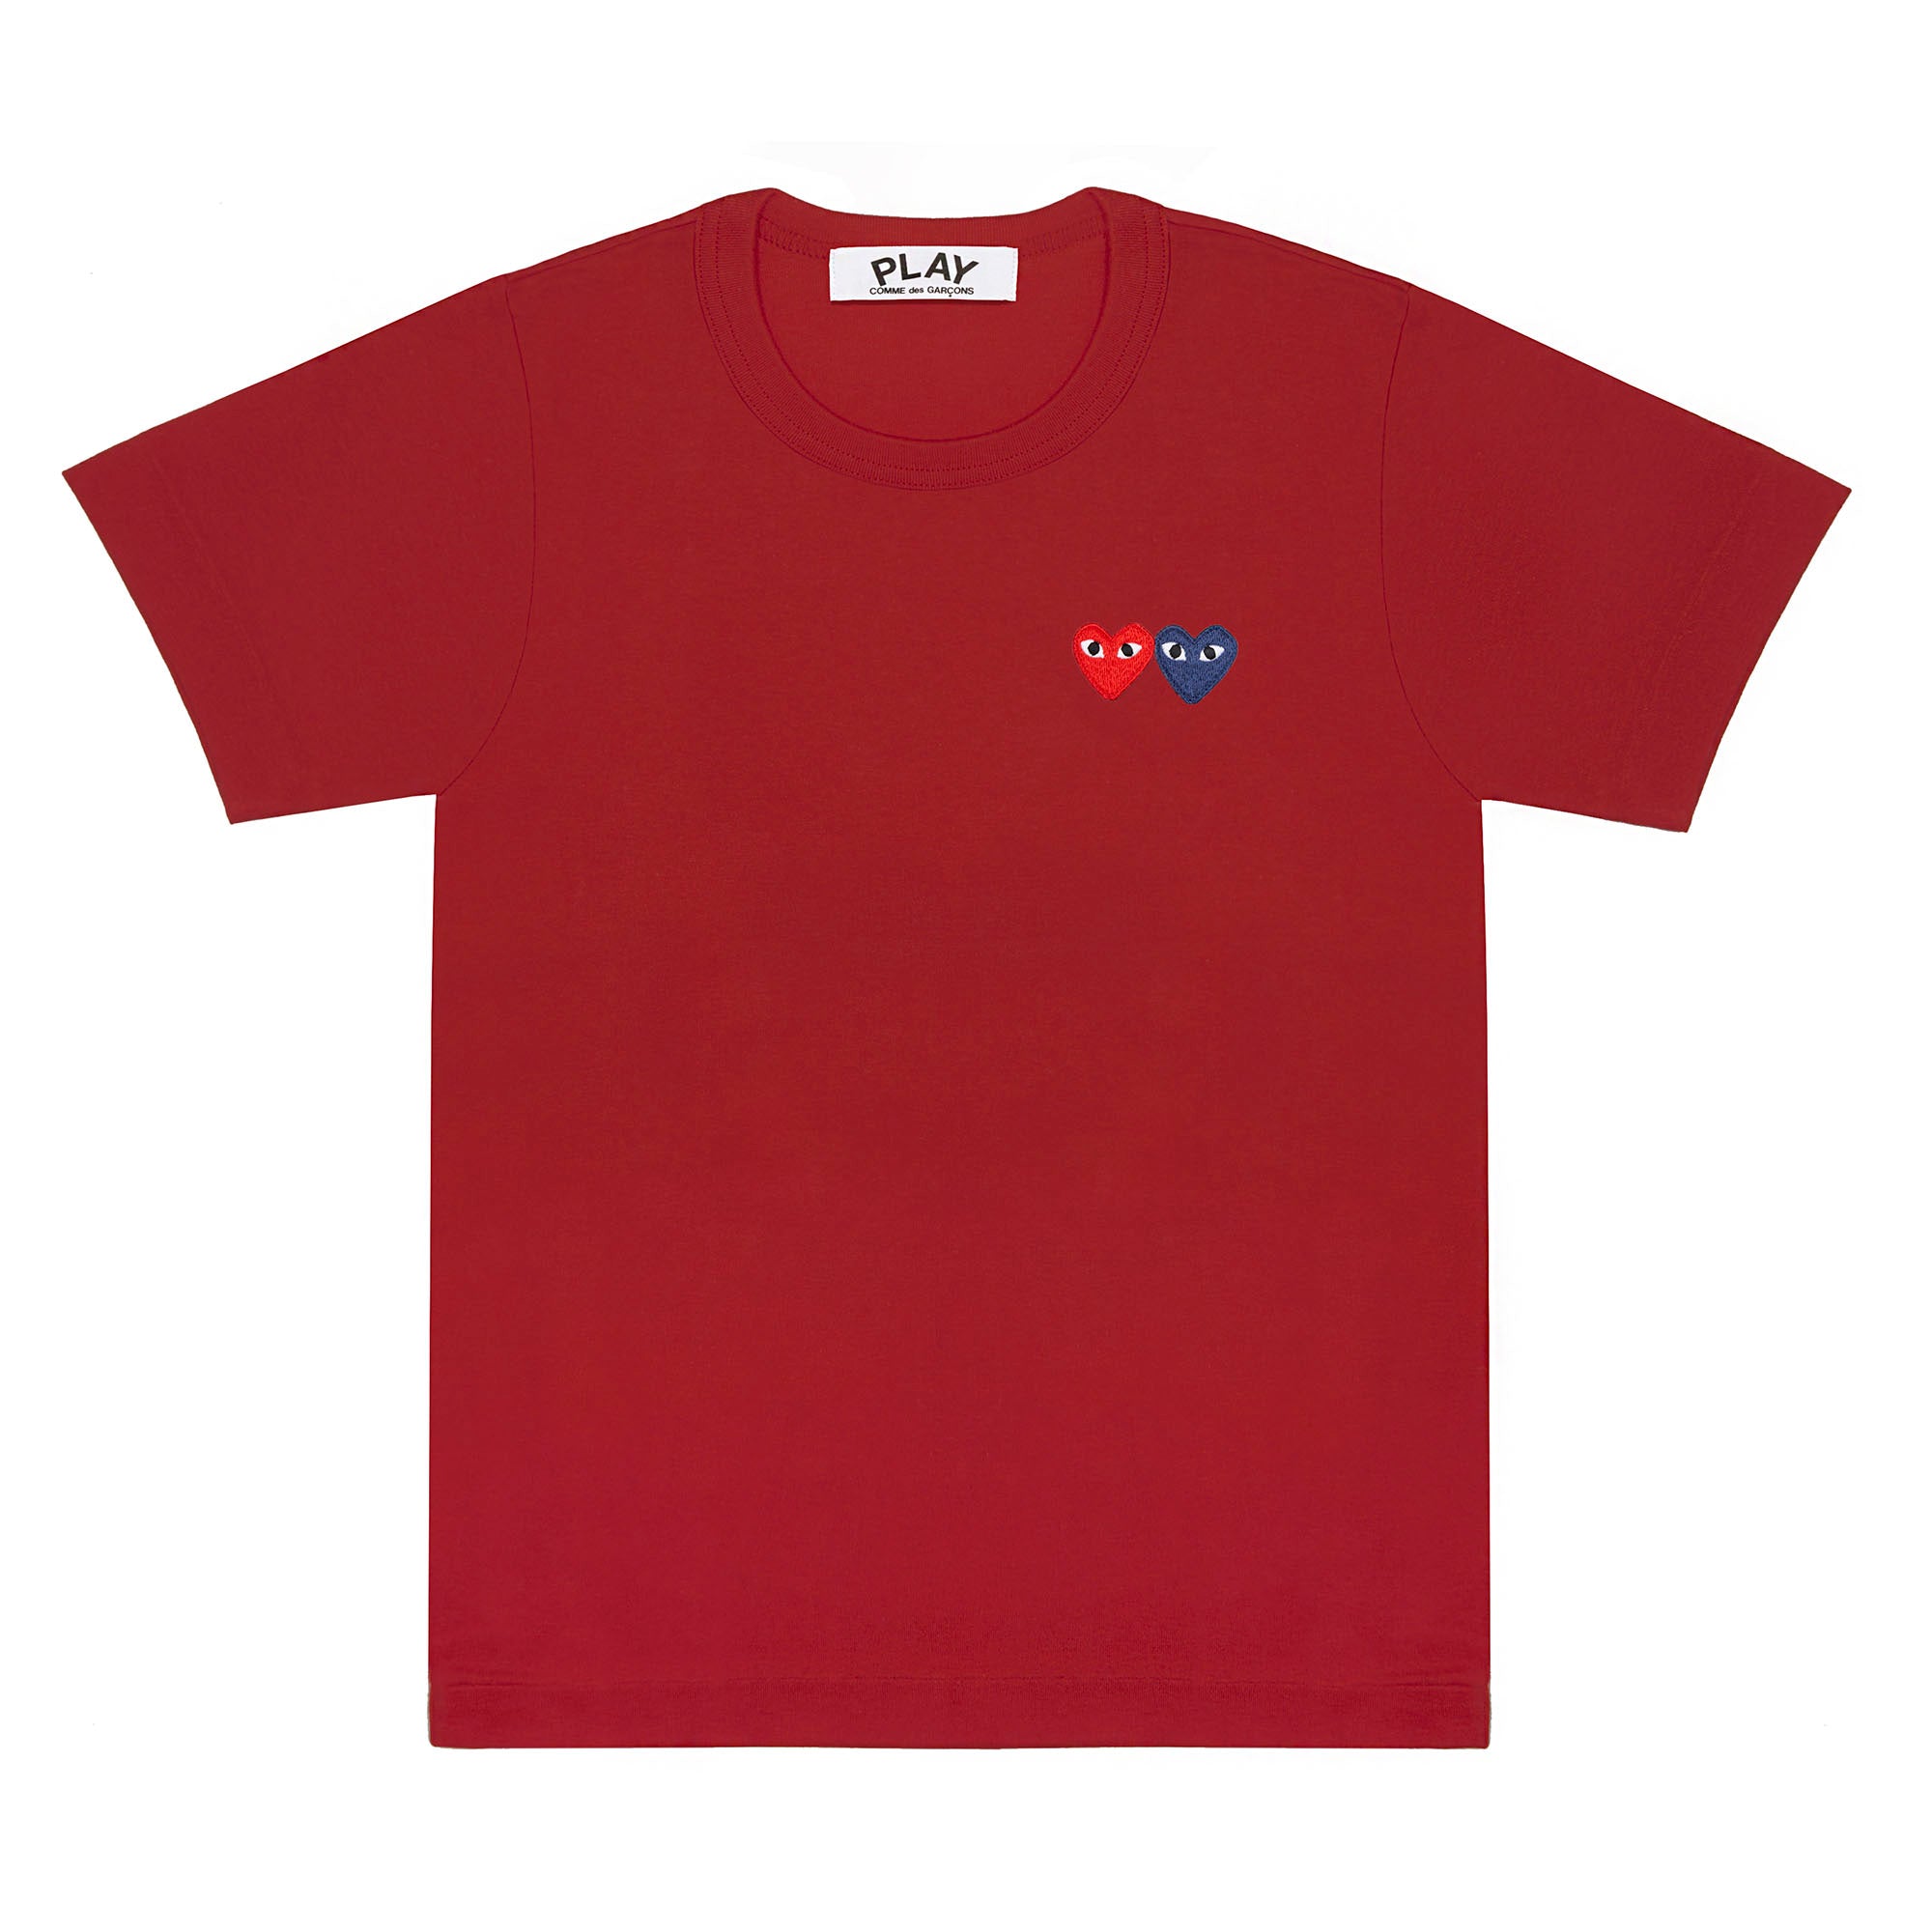 Play Comme des Garçons - T-Shirt with Double Heart - (Burgundy) view 1